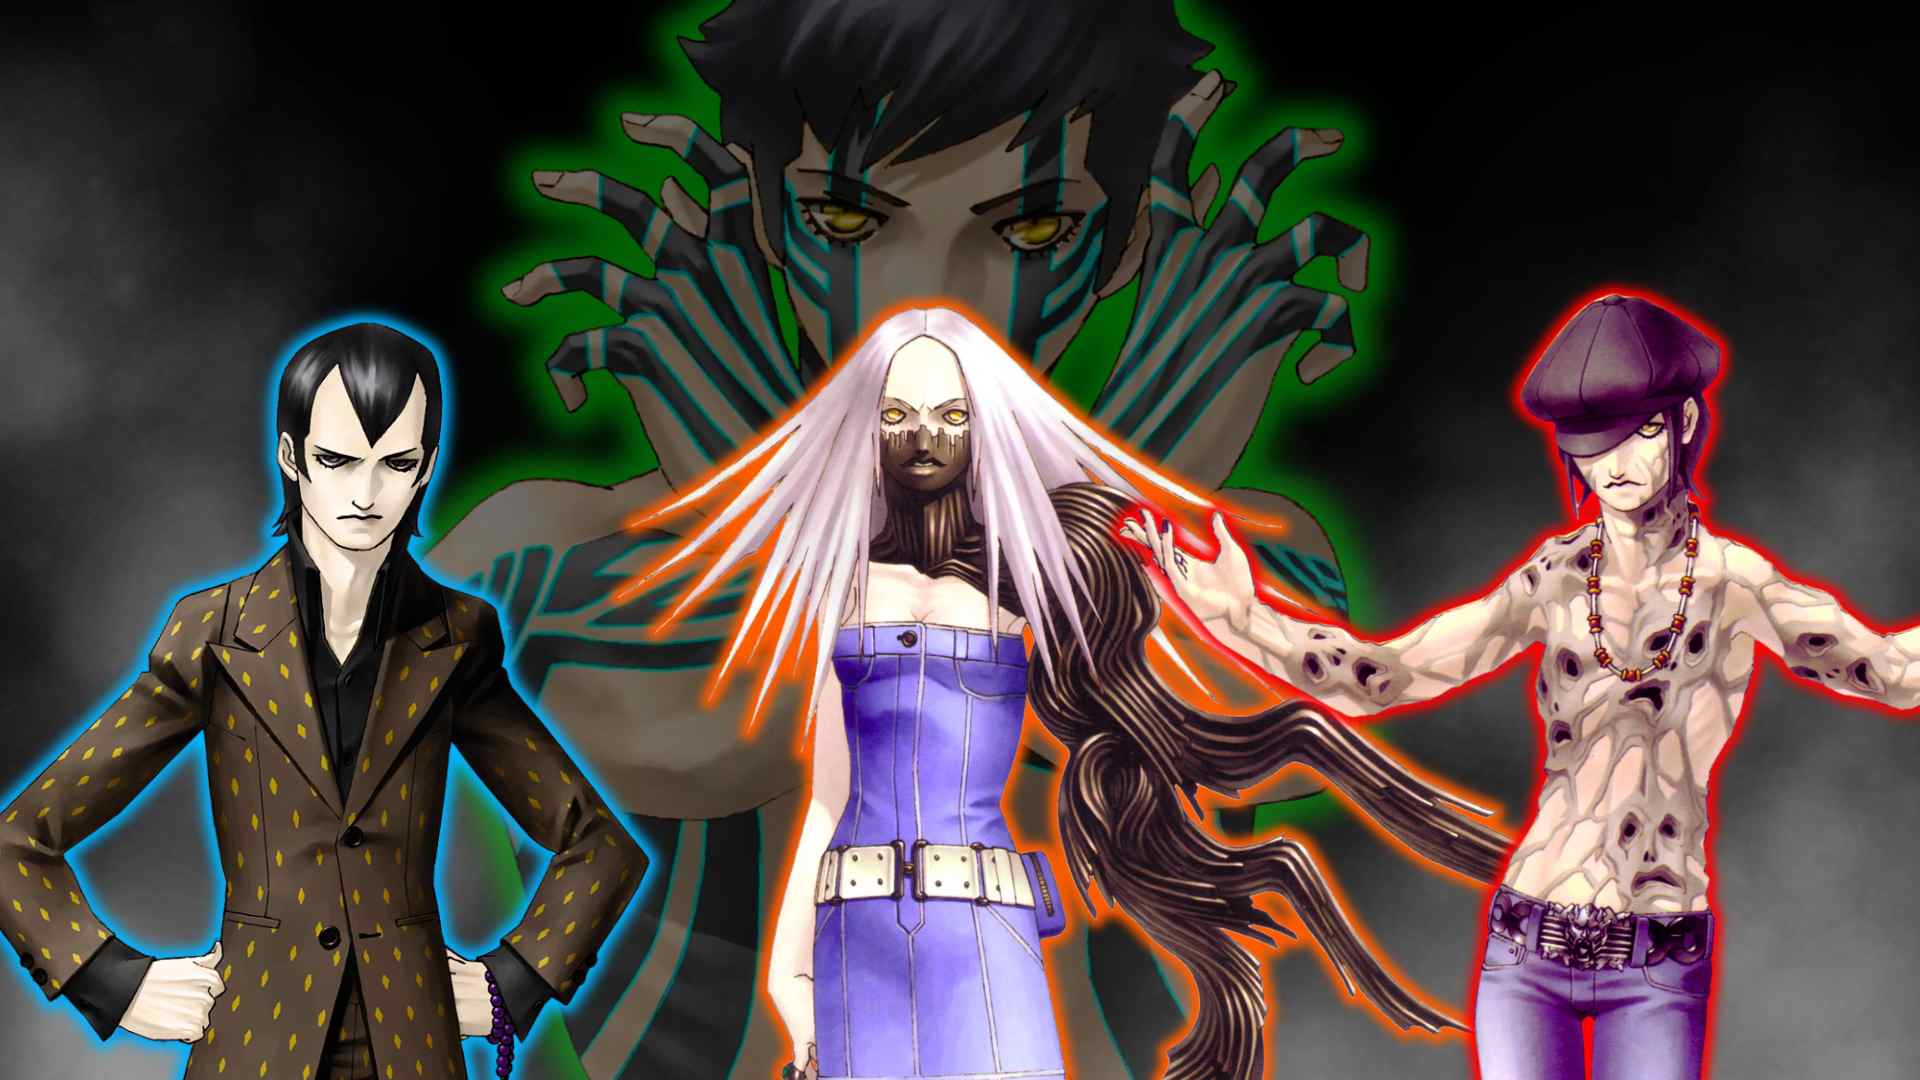 The Reasons in Shin Megami Tensei 3 seem fairly relevant in context of the modern world.